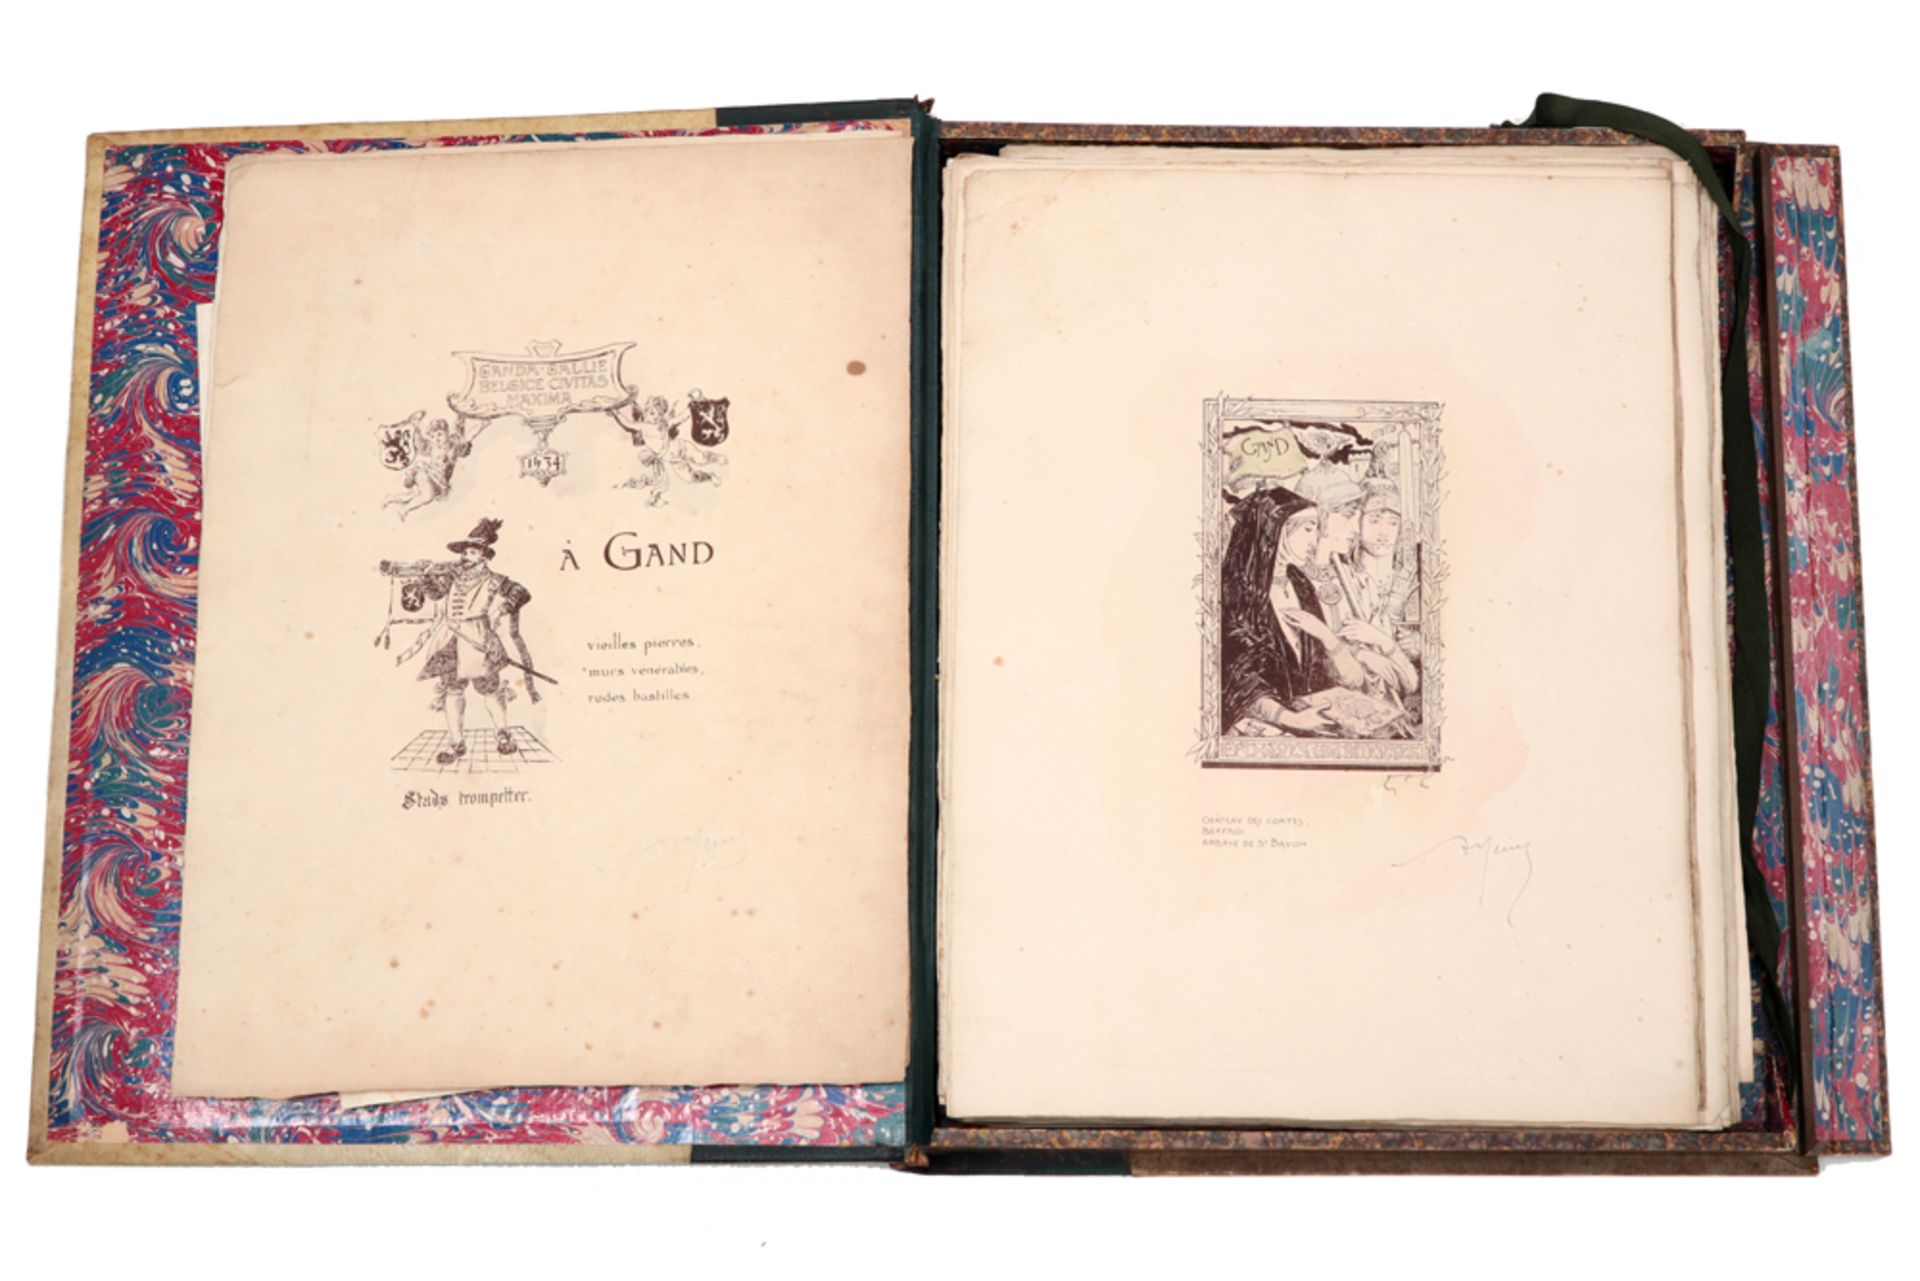 porfolio dd 1894 with lithographs by Armand Heins and with a writing by Heins - with a nice Art - Image 2 of 4